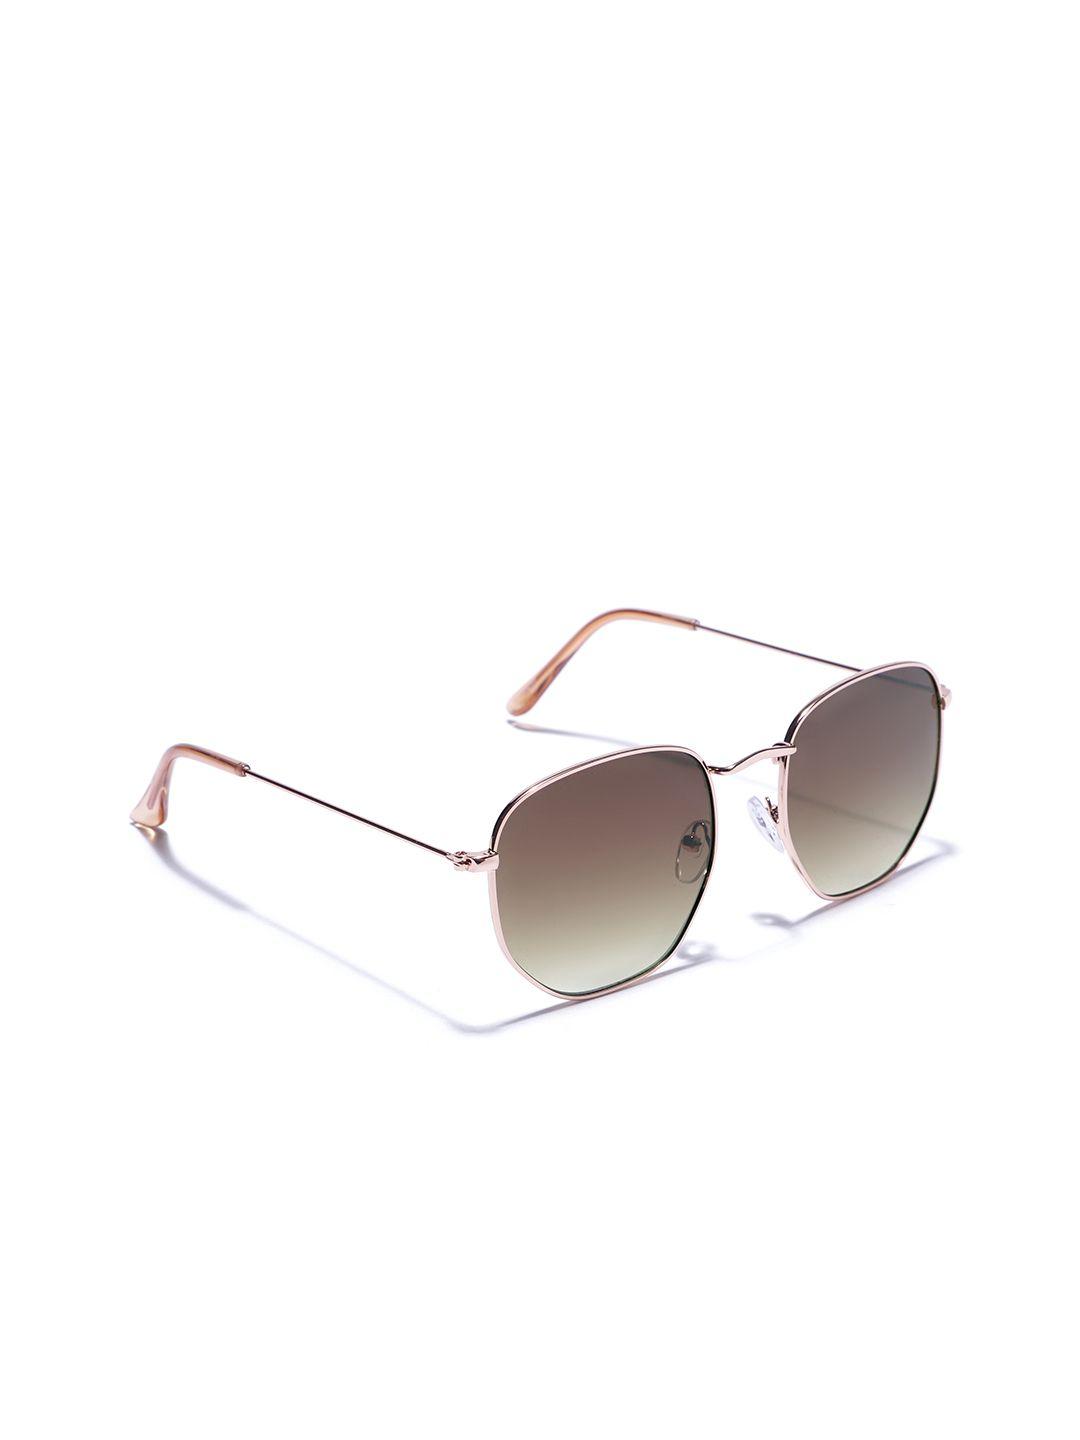 carlton-london-women-rectangle-sunglasses-with-uv-protected-lens-clsw280